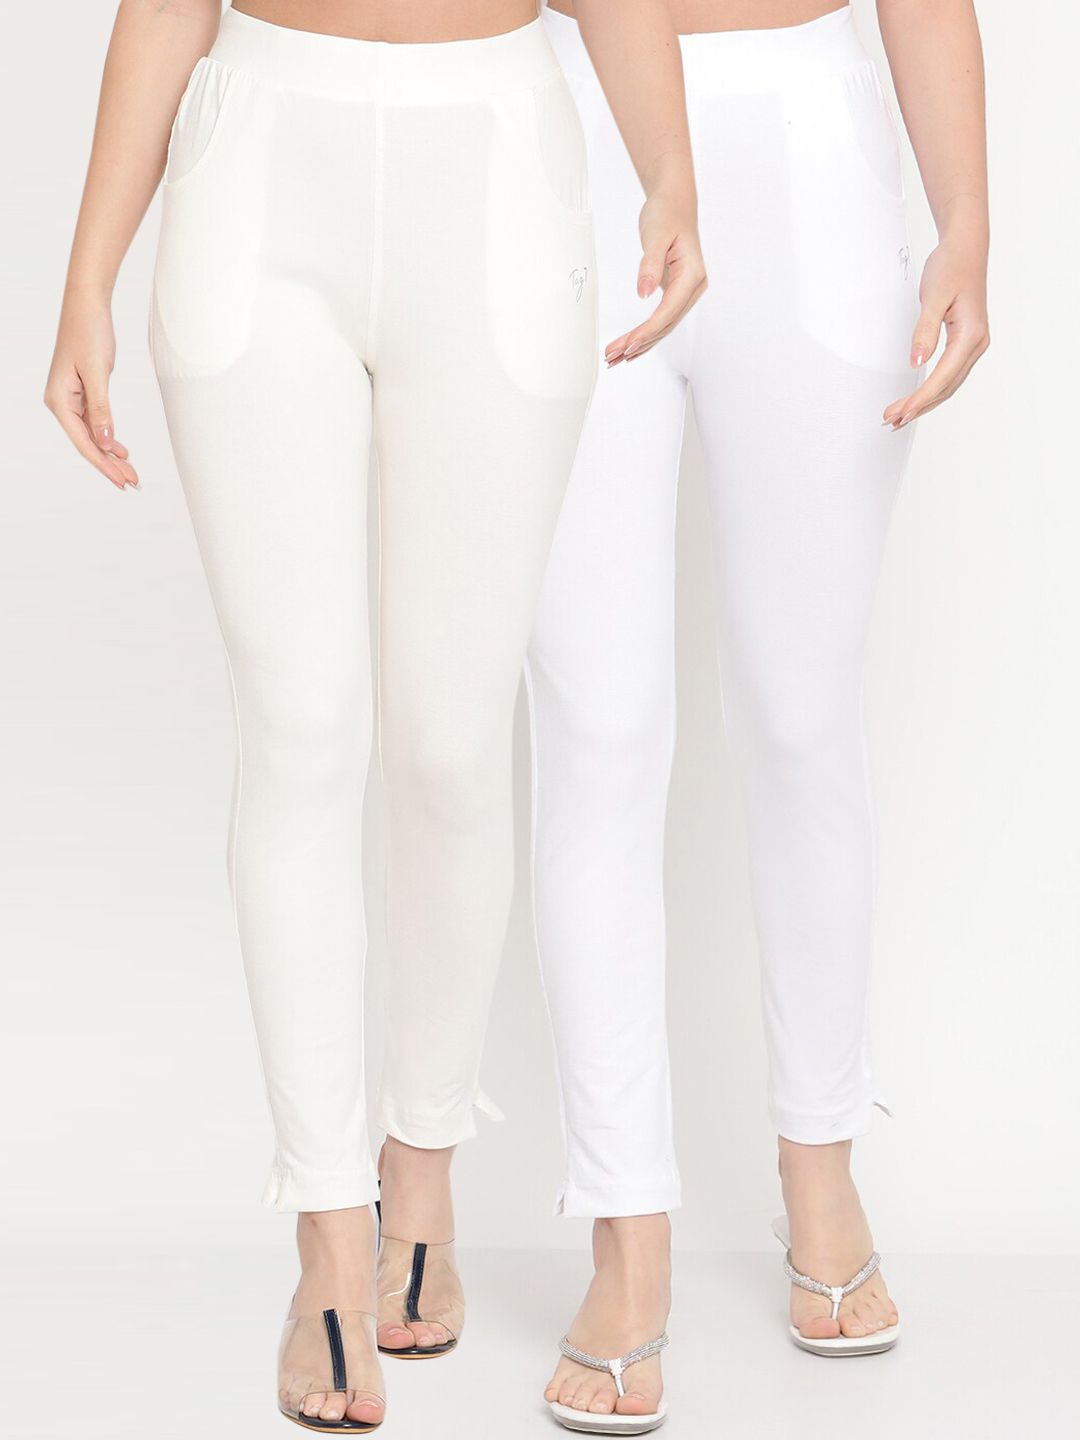 TAG 7 Women White Pack of 2 Straight Fit Ankle-Length Leggings Price in India